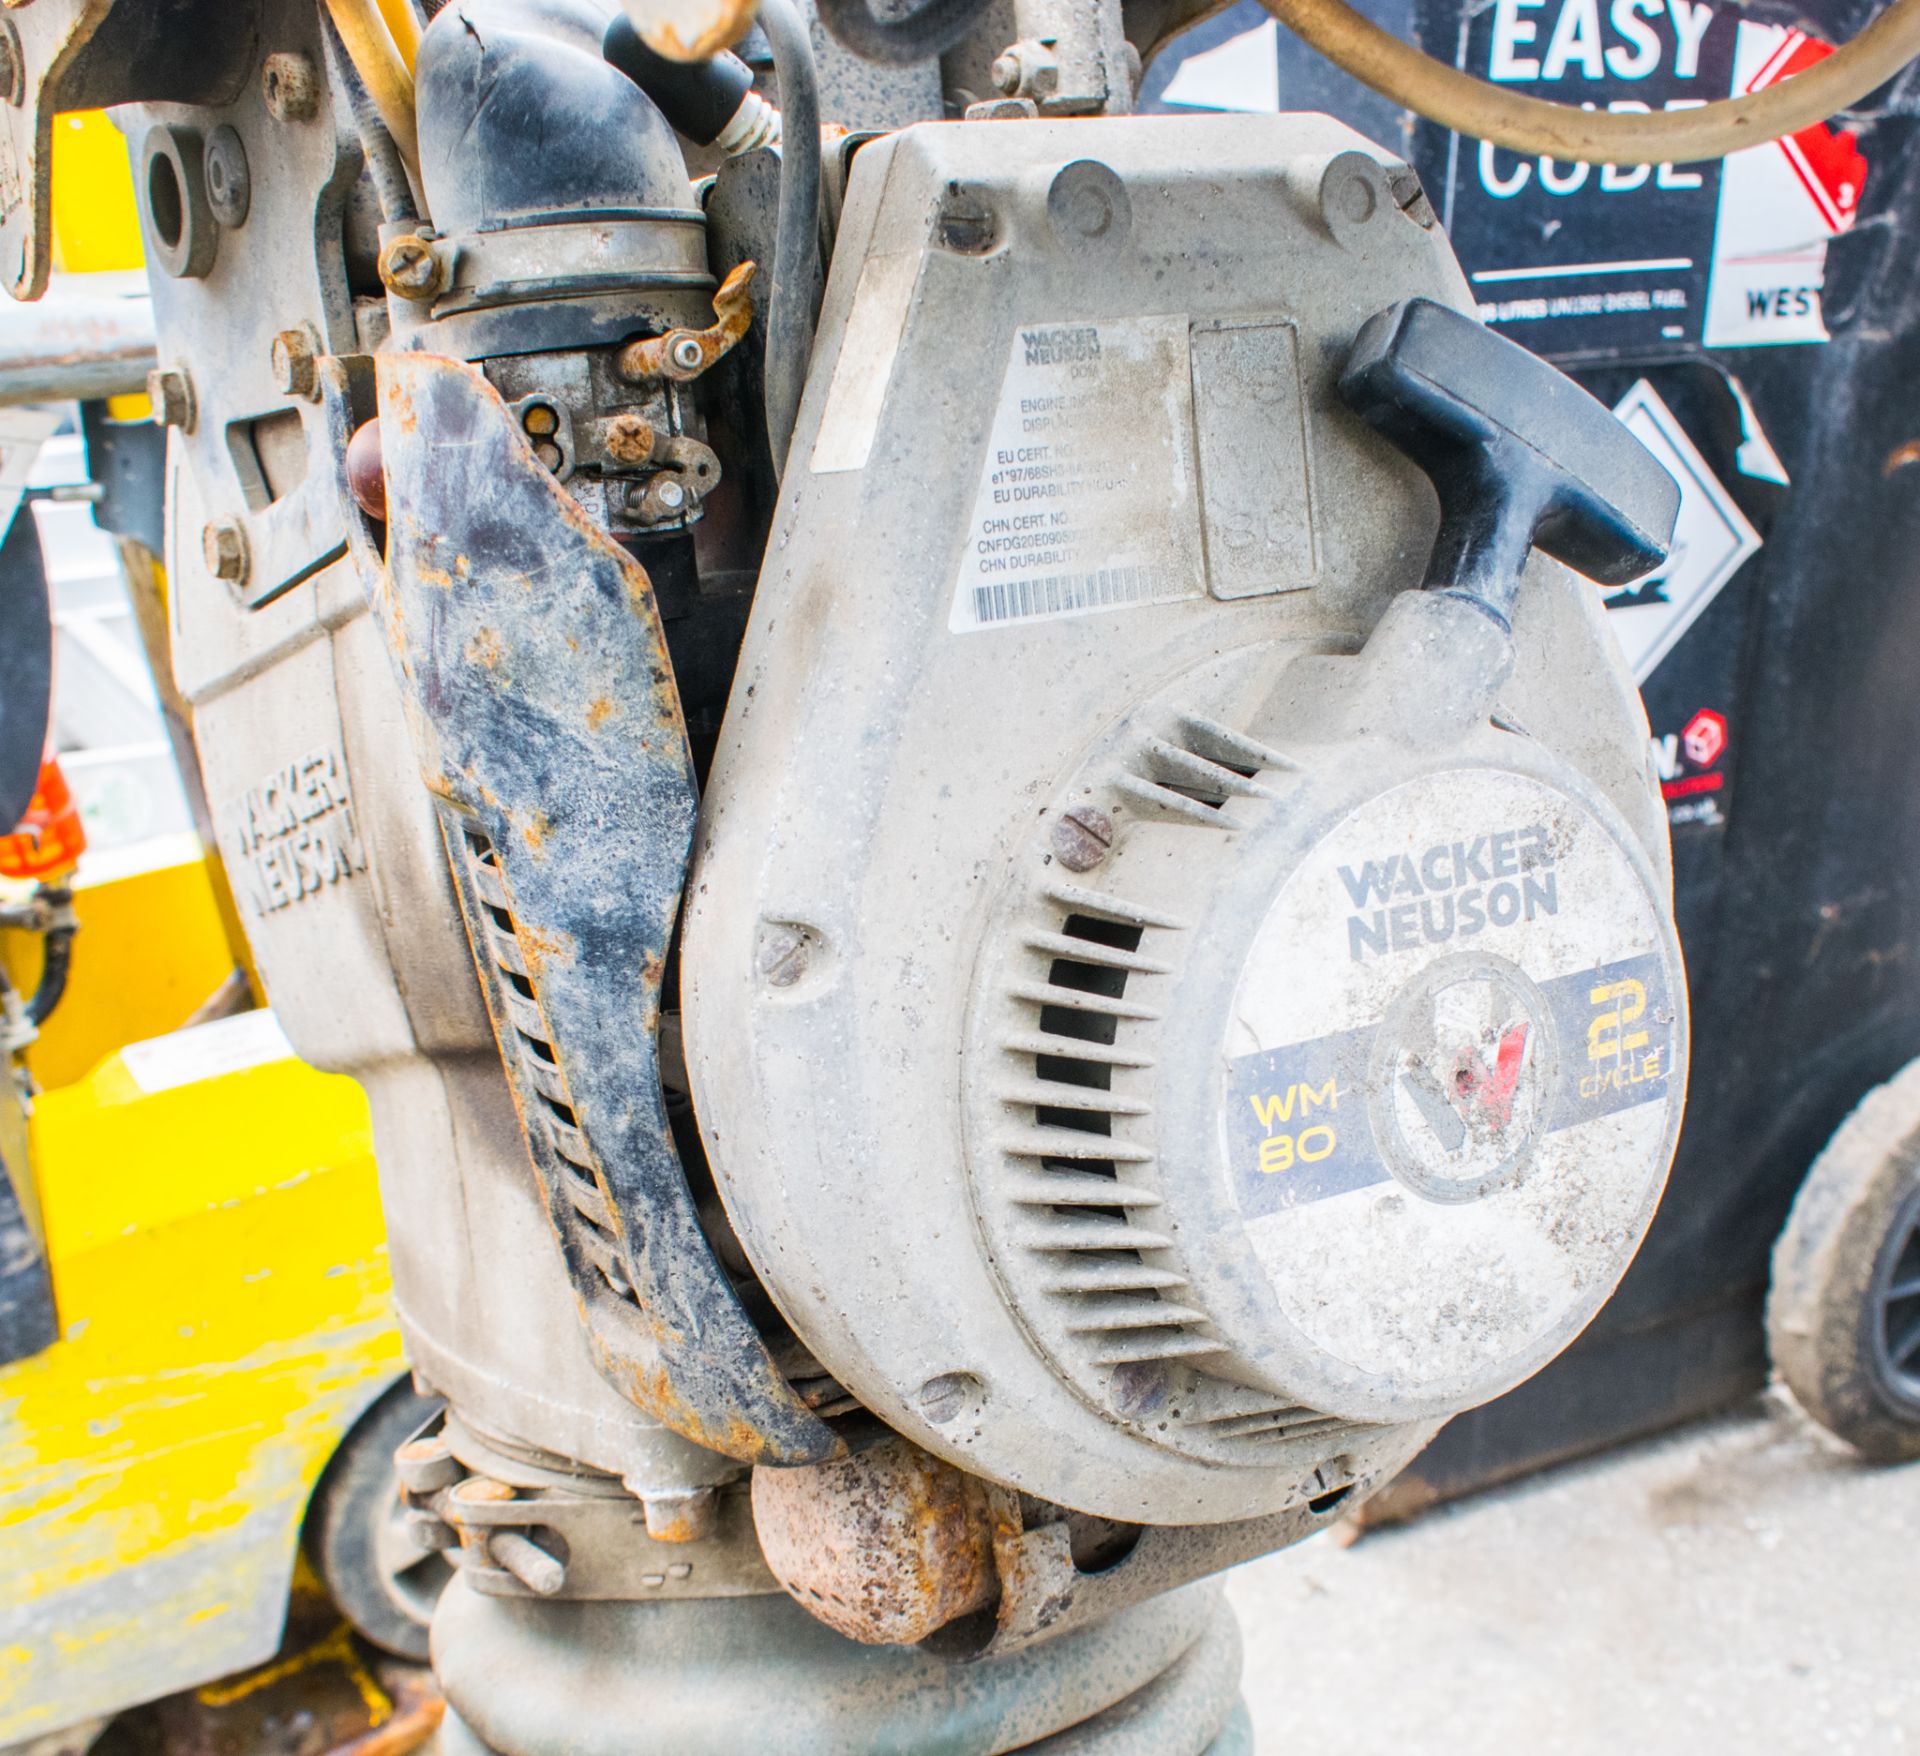 Wacker Neuson BS60-4 petrol driven trench compactor A760009 - Image 2 of 2